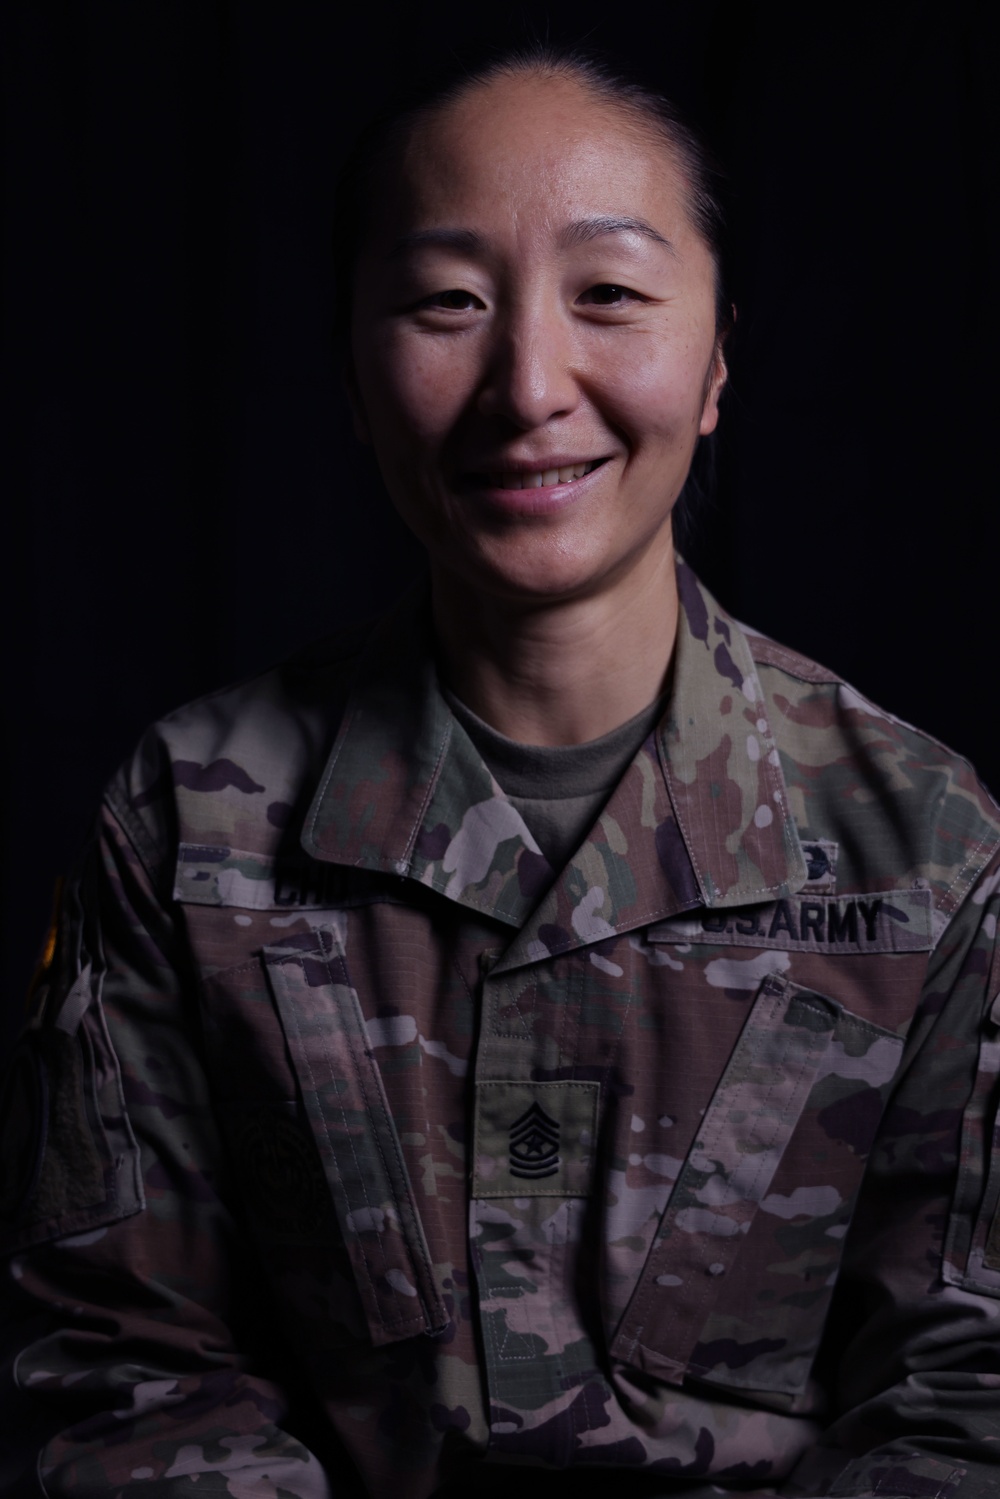 Senior Chemical Corps noncommissioned officer selected for command sergeant major